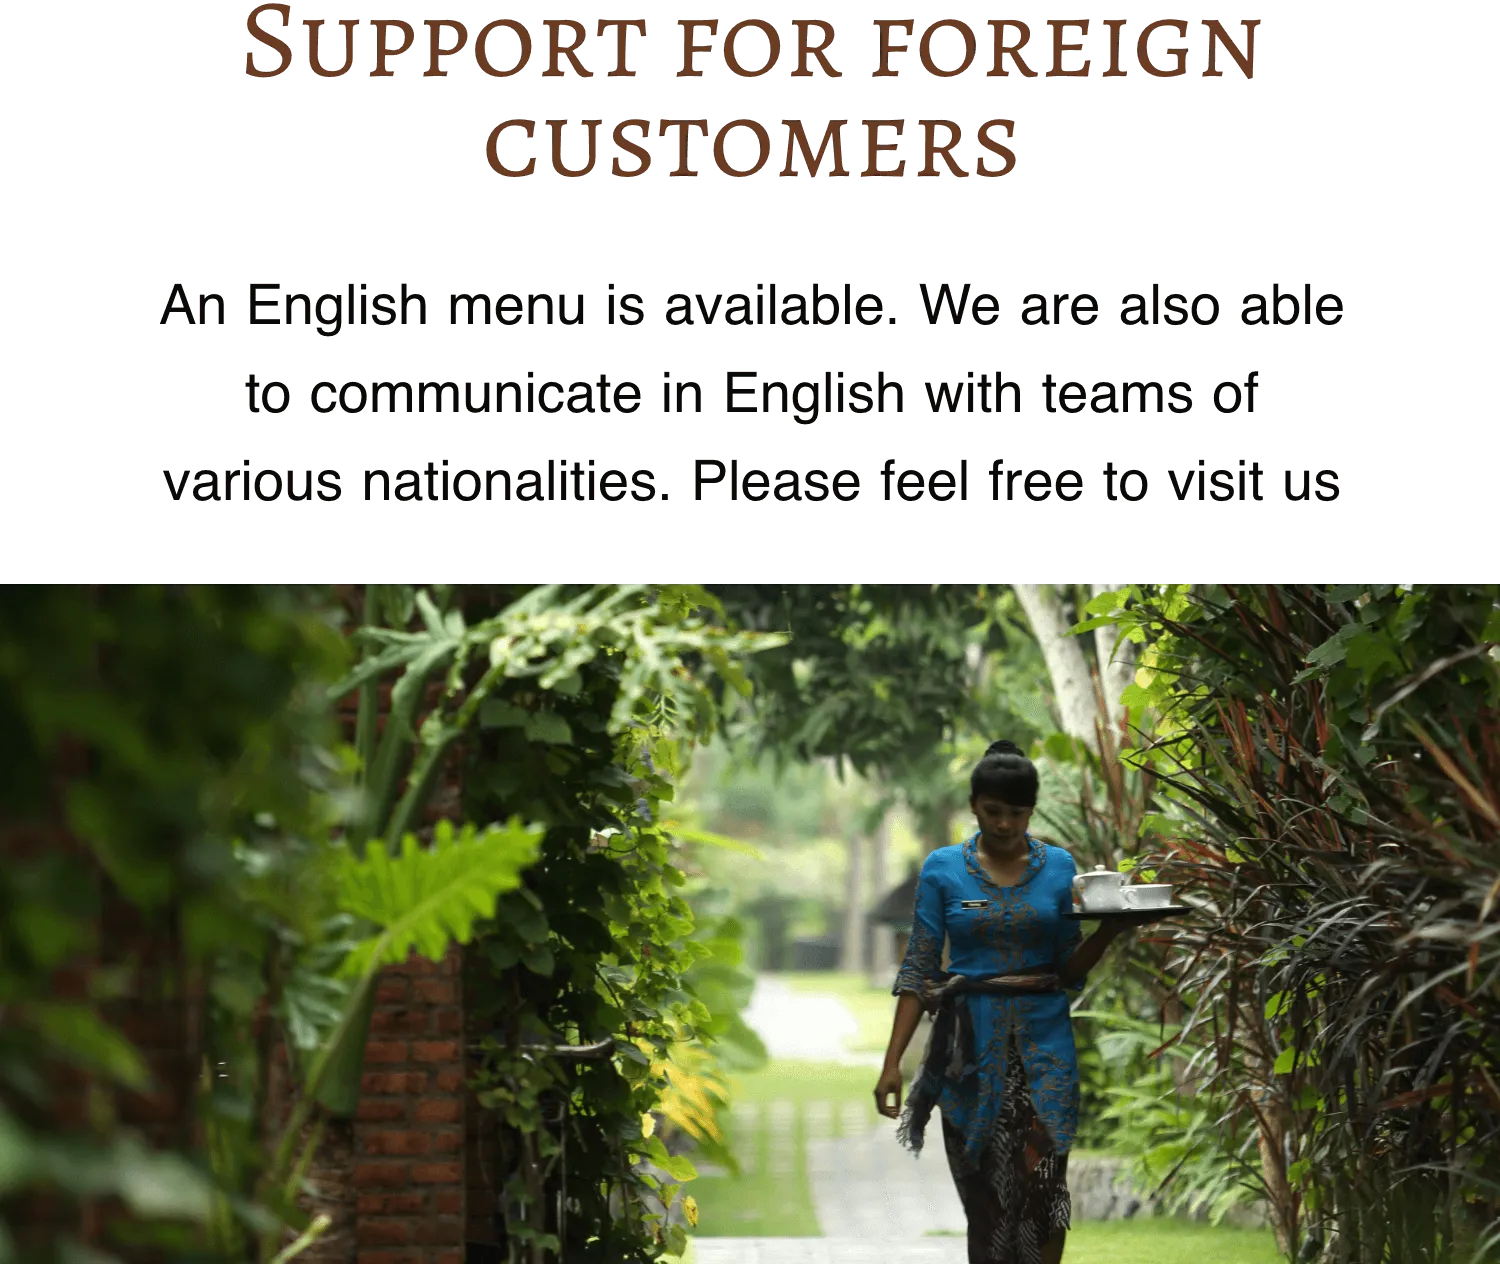 Support for foreign customers An English menu is available. We are also able to communicate in English with teams of various nationalities. Please feel free to visit us